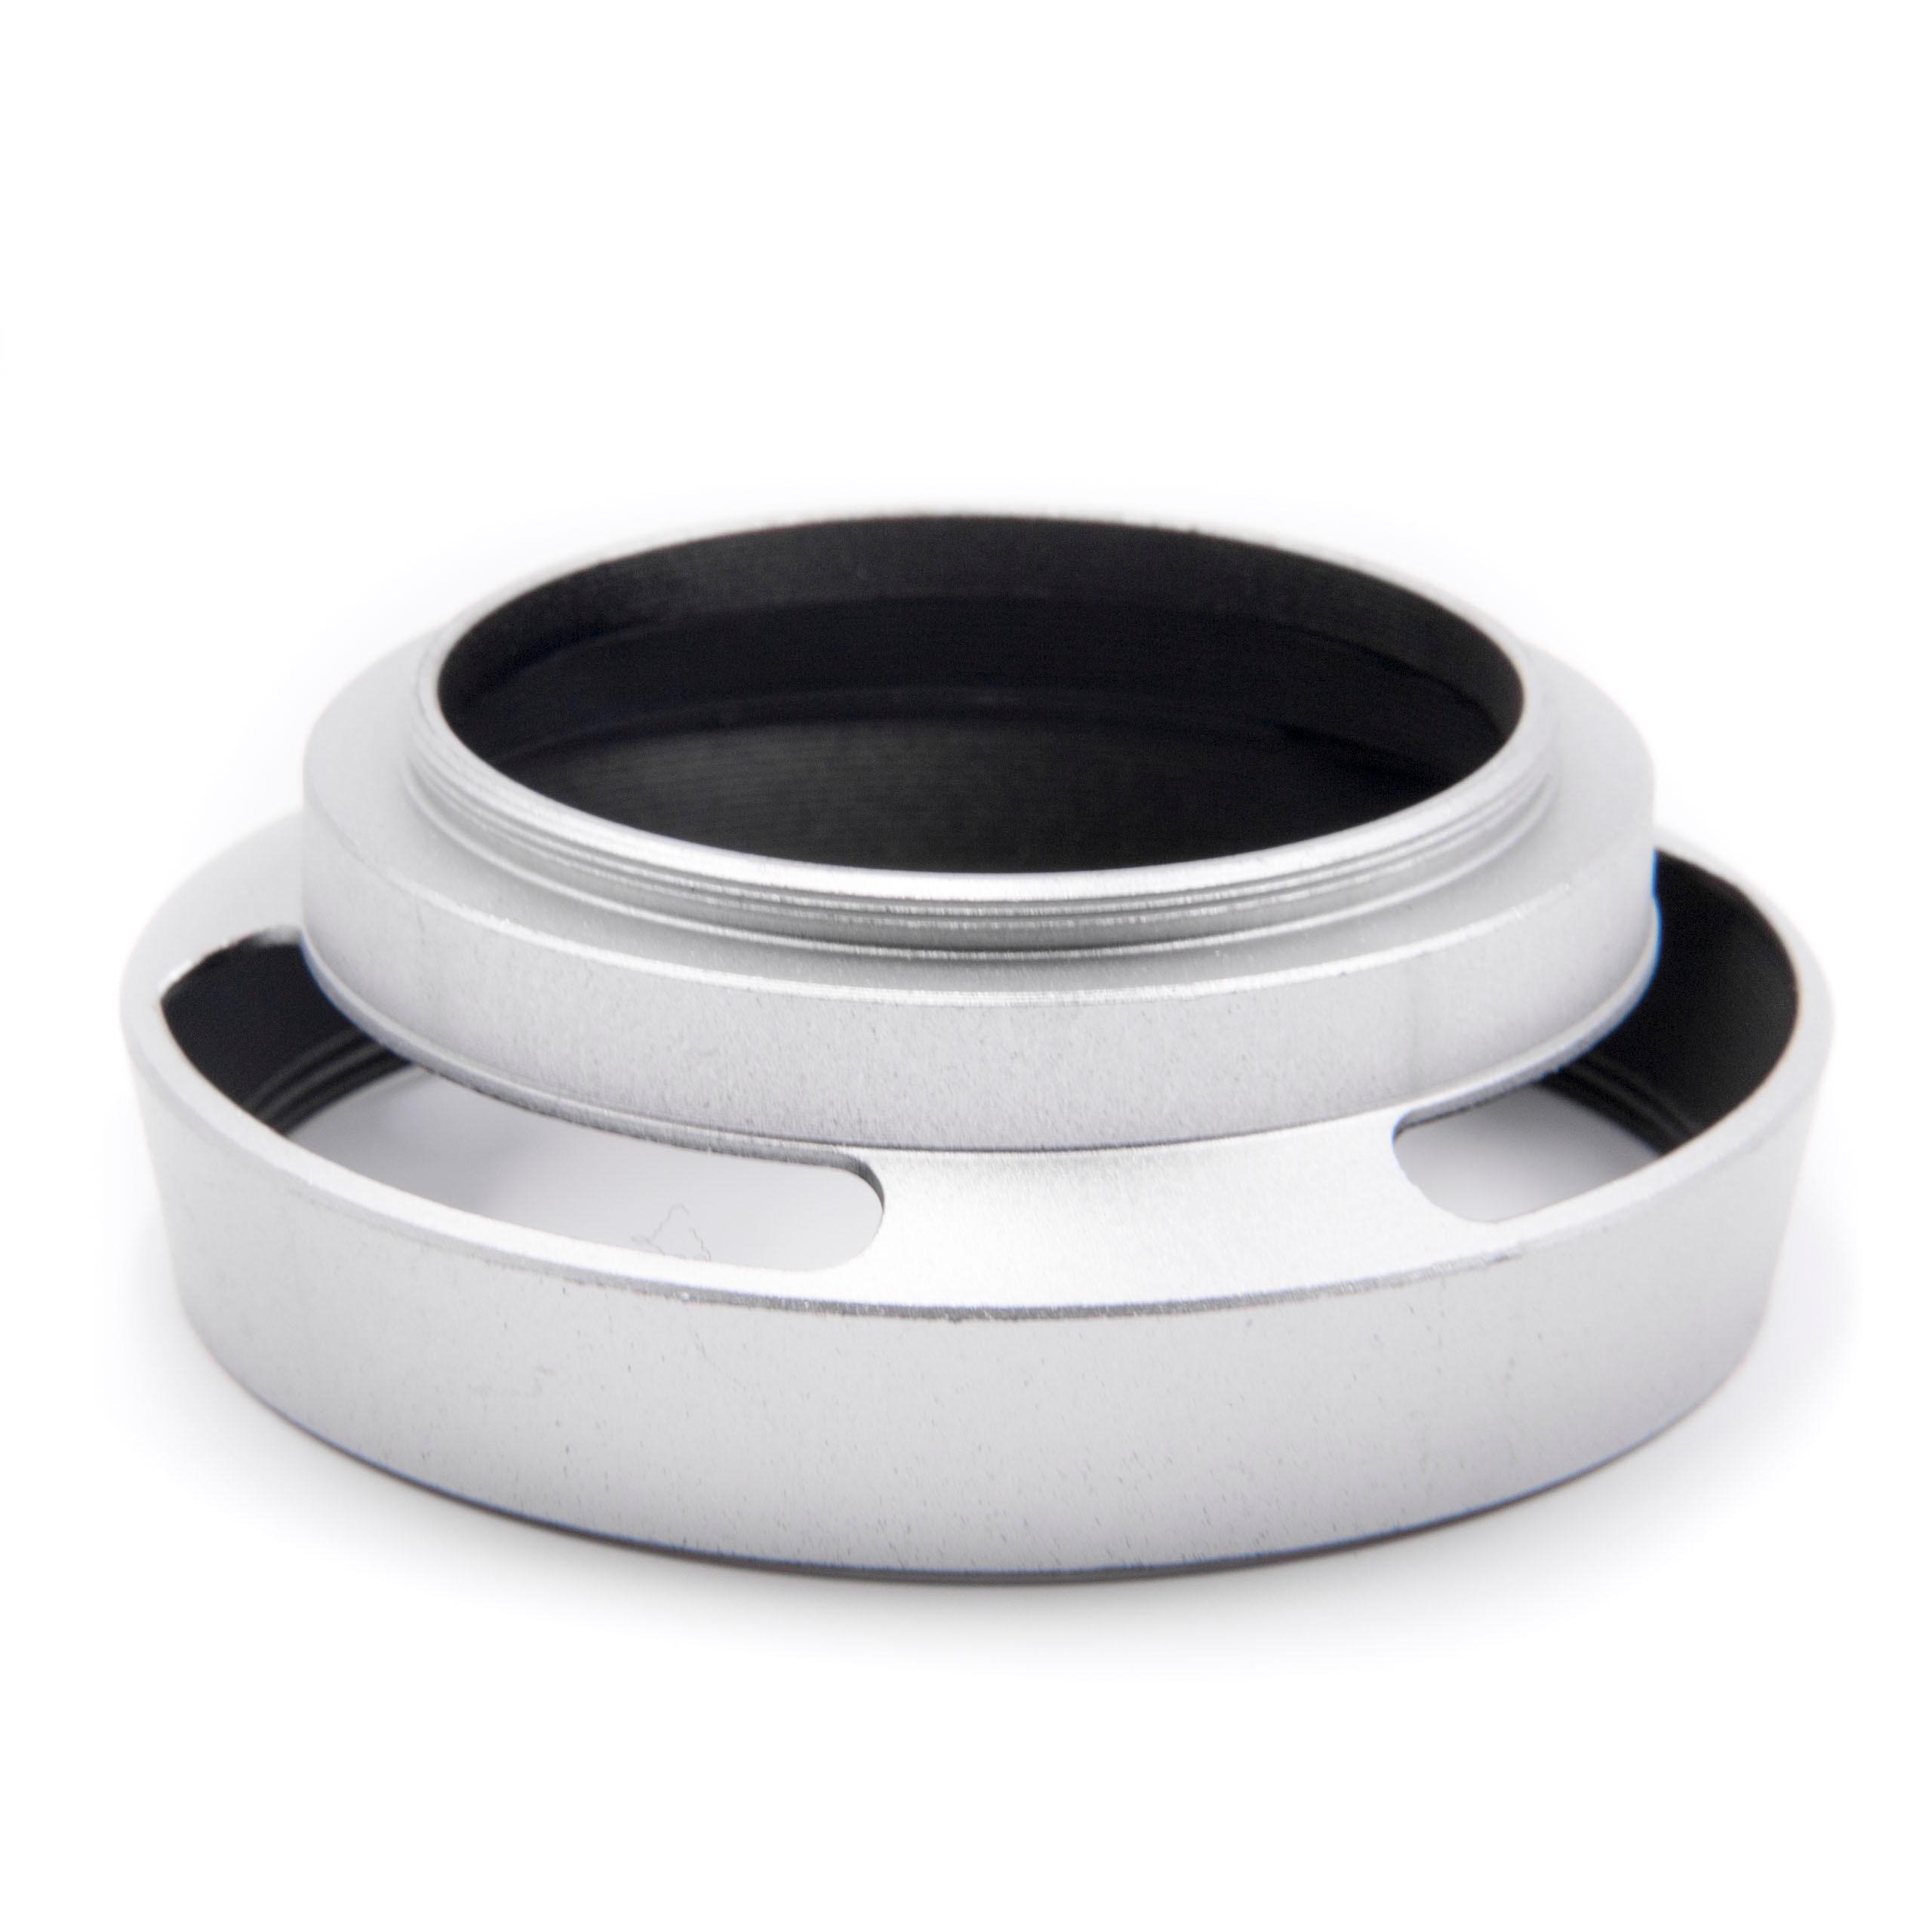 Lens Hood suitable for 39mm Lens - Lens Shade Silver, Round